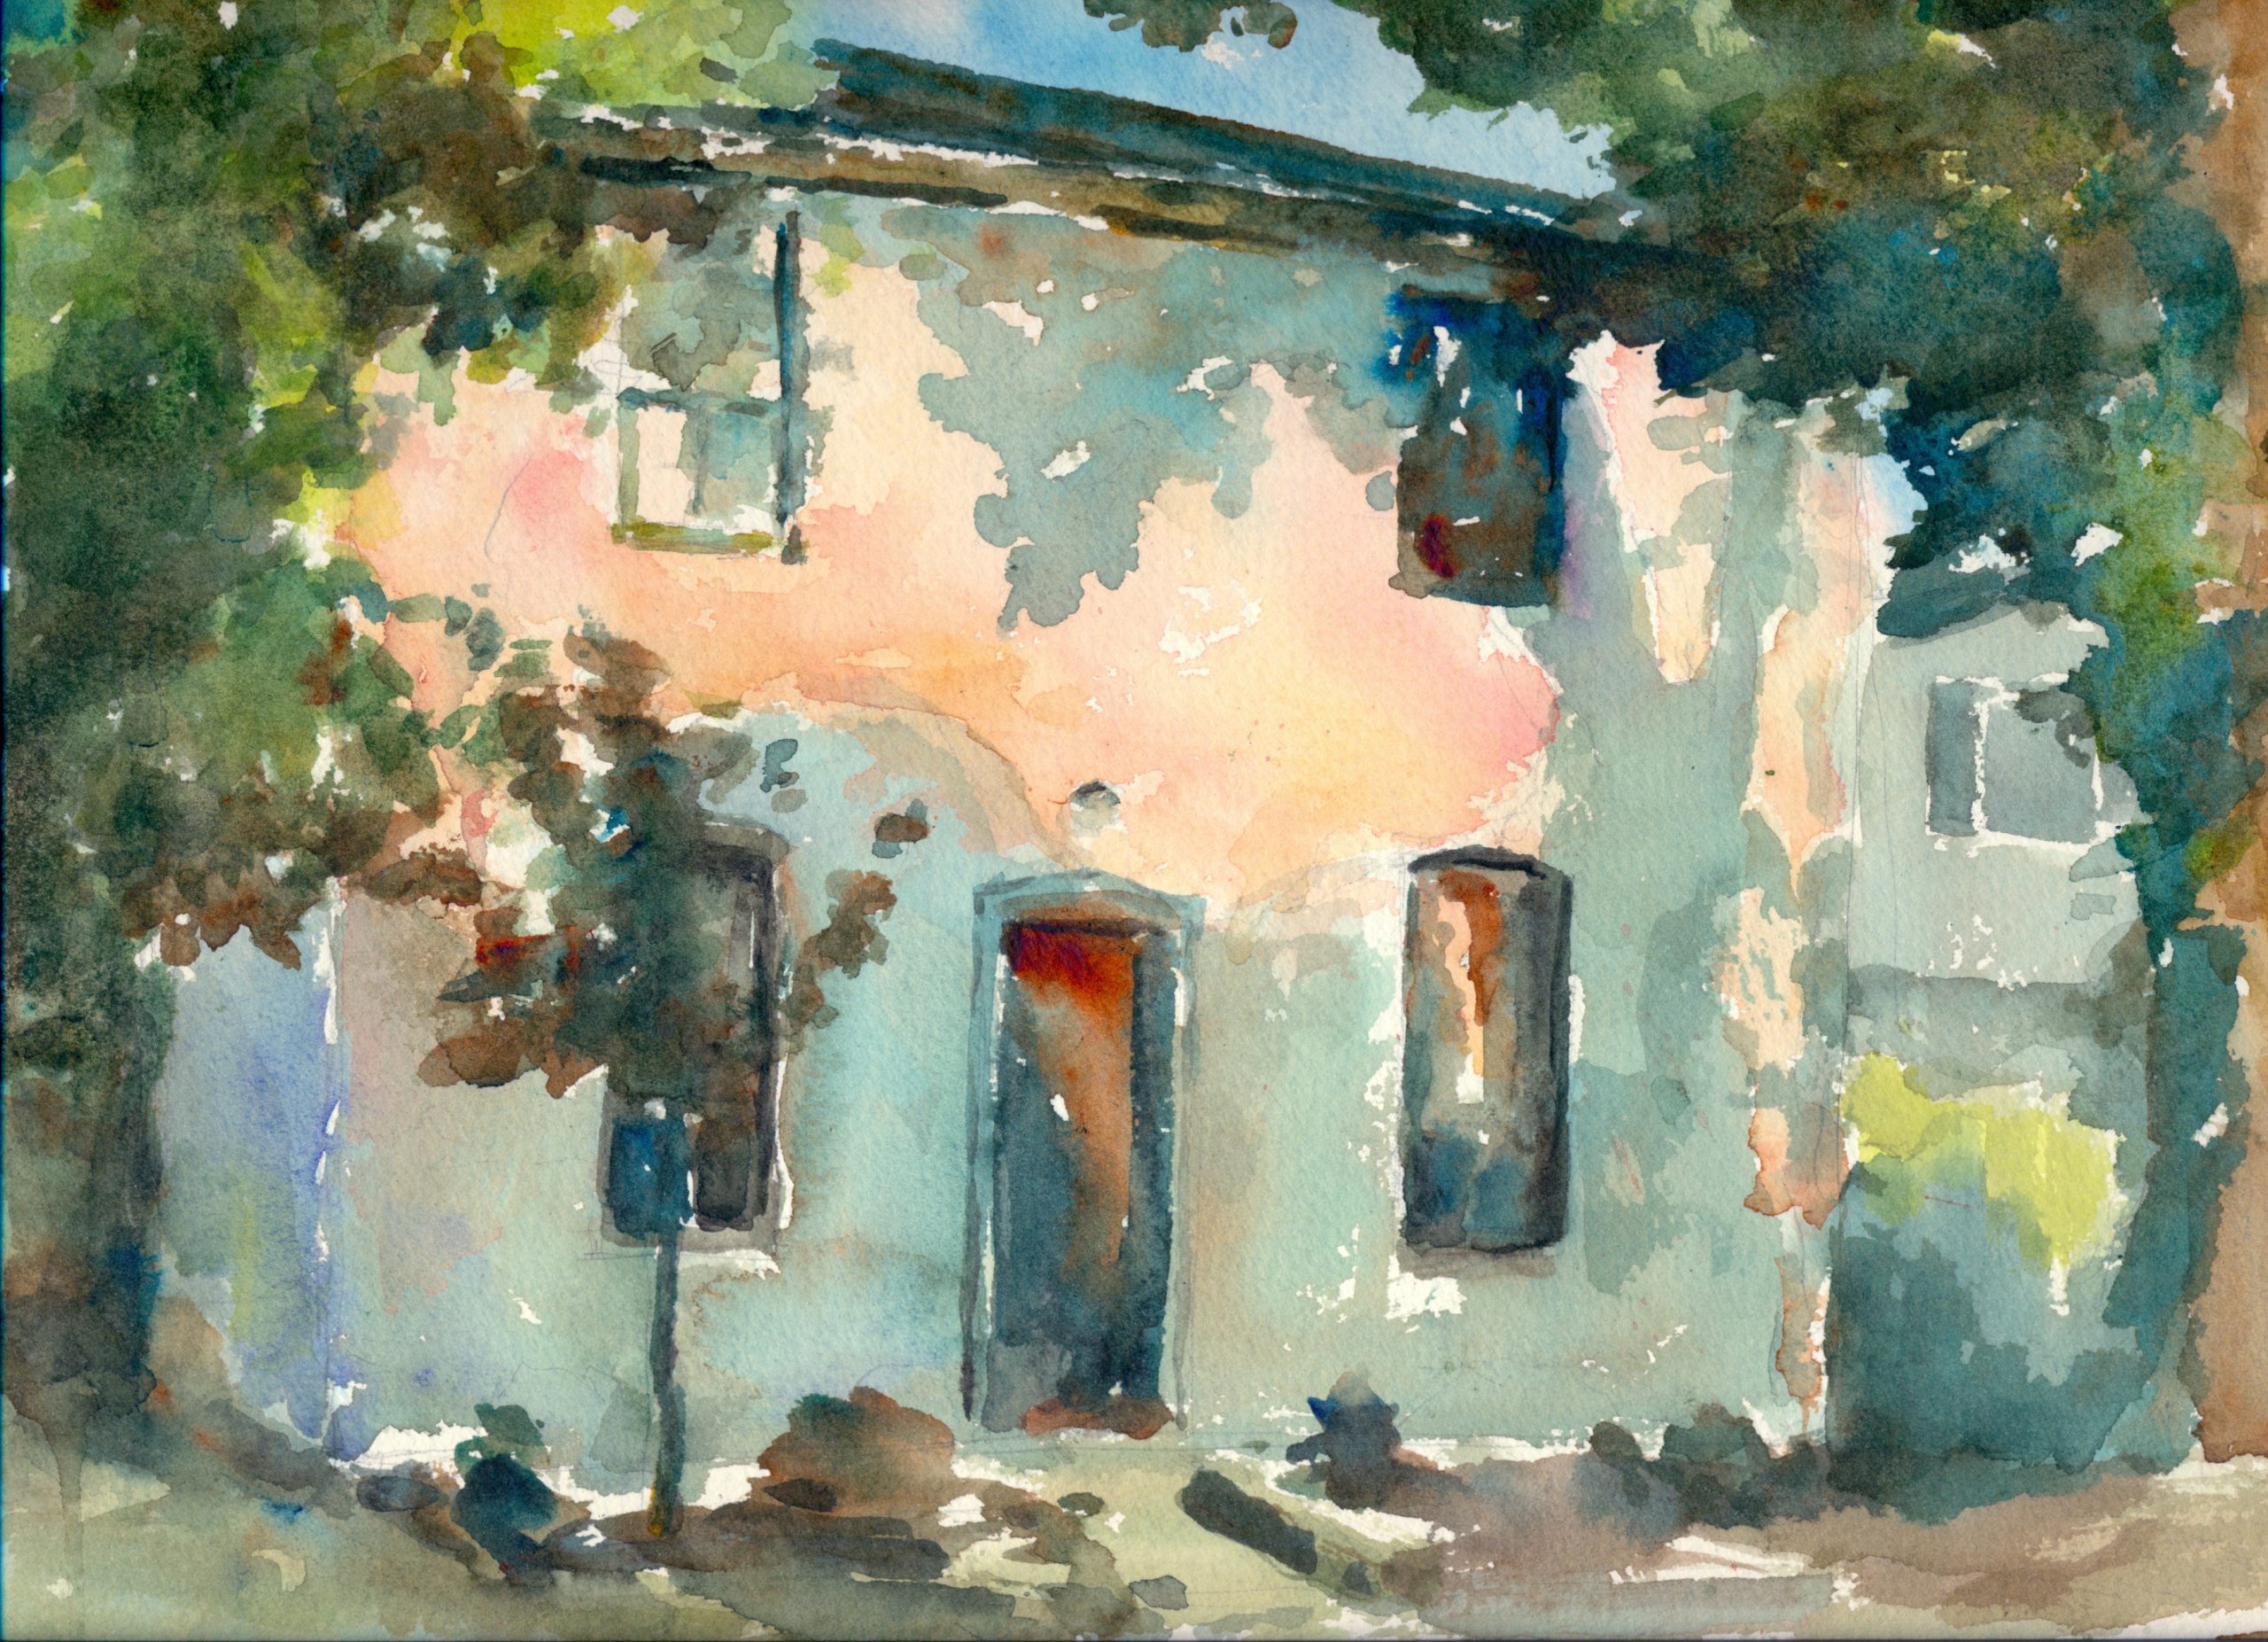 Watercolour by Michele Miller. Two story building flanked by trees.